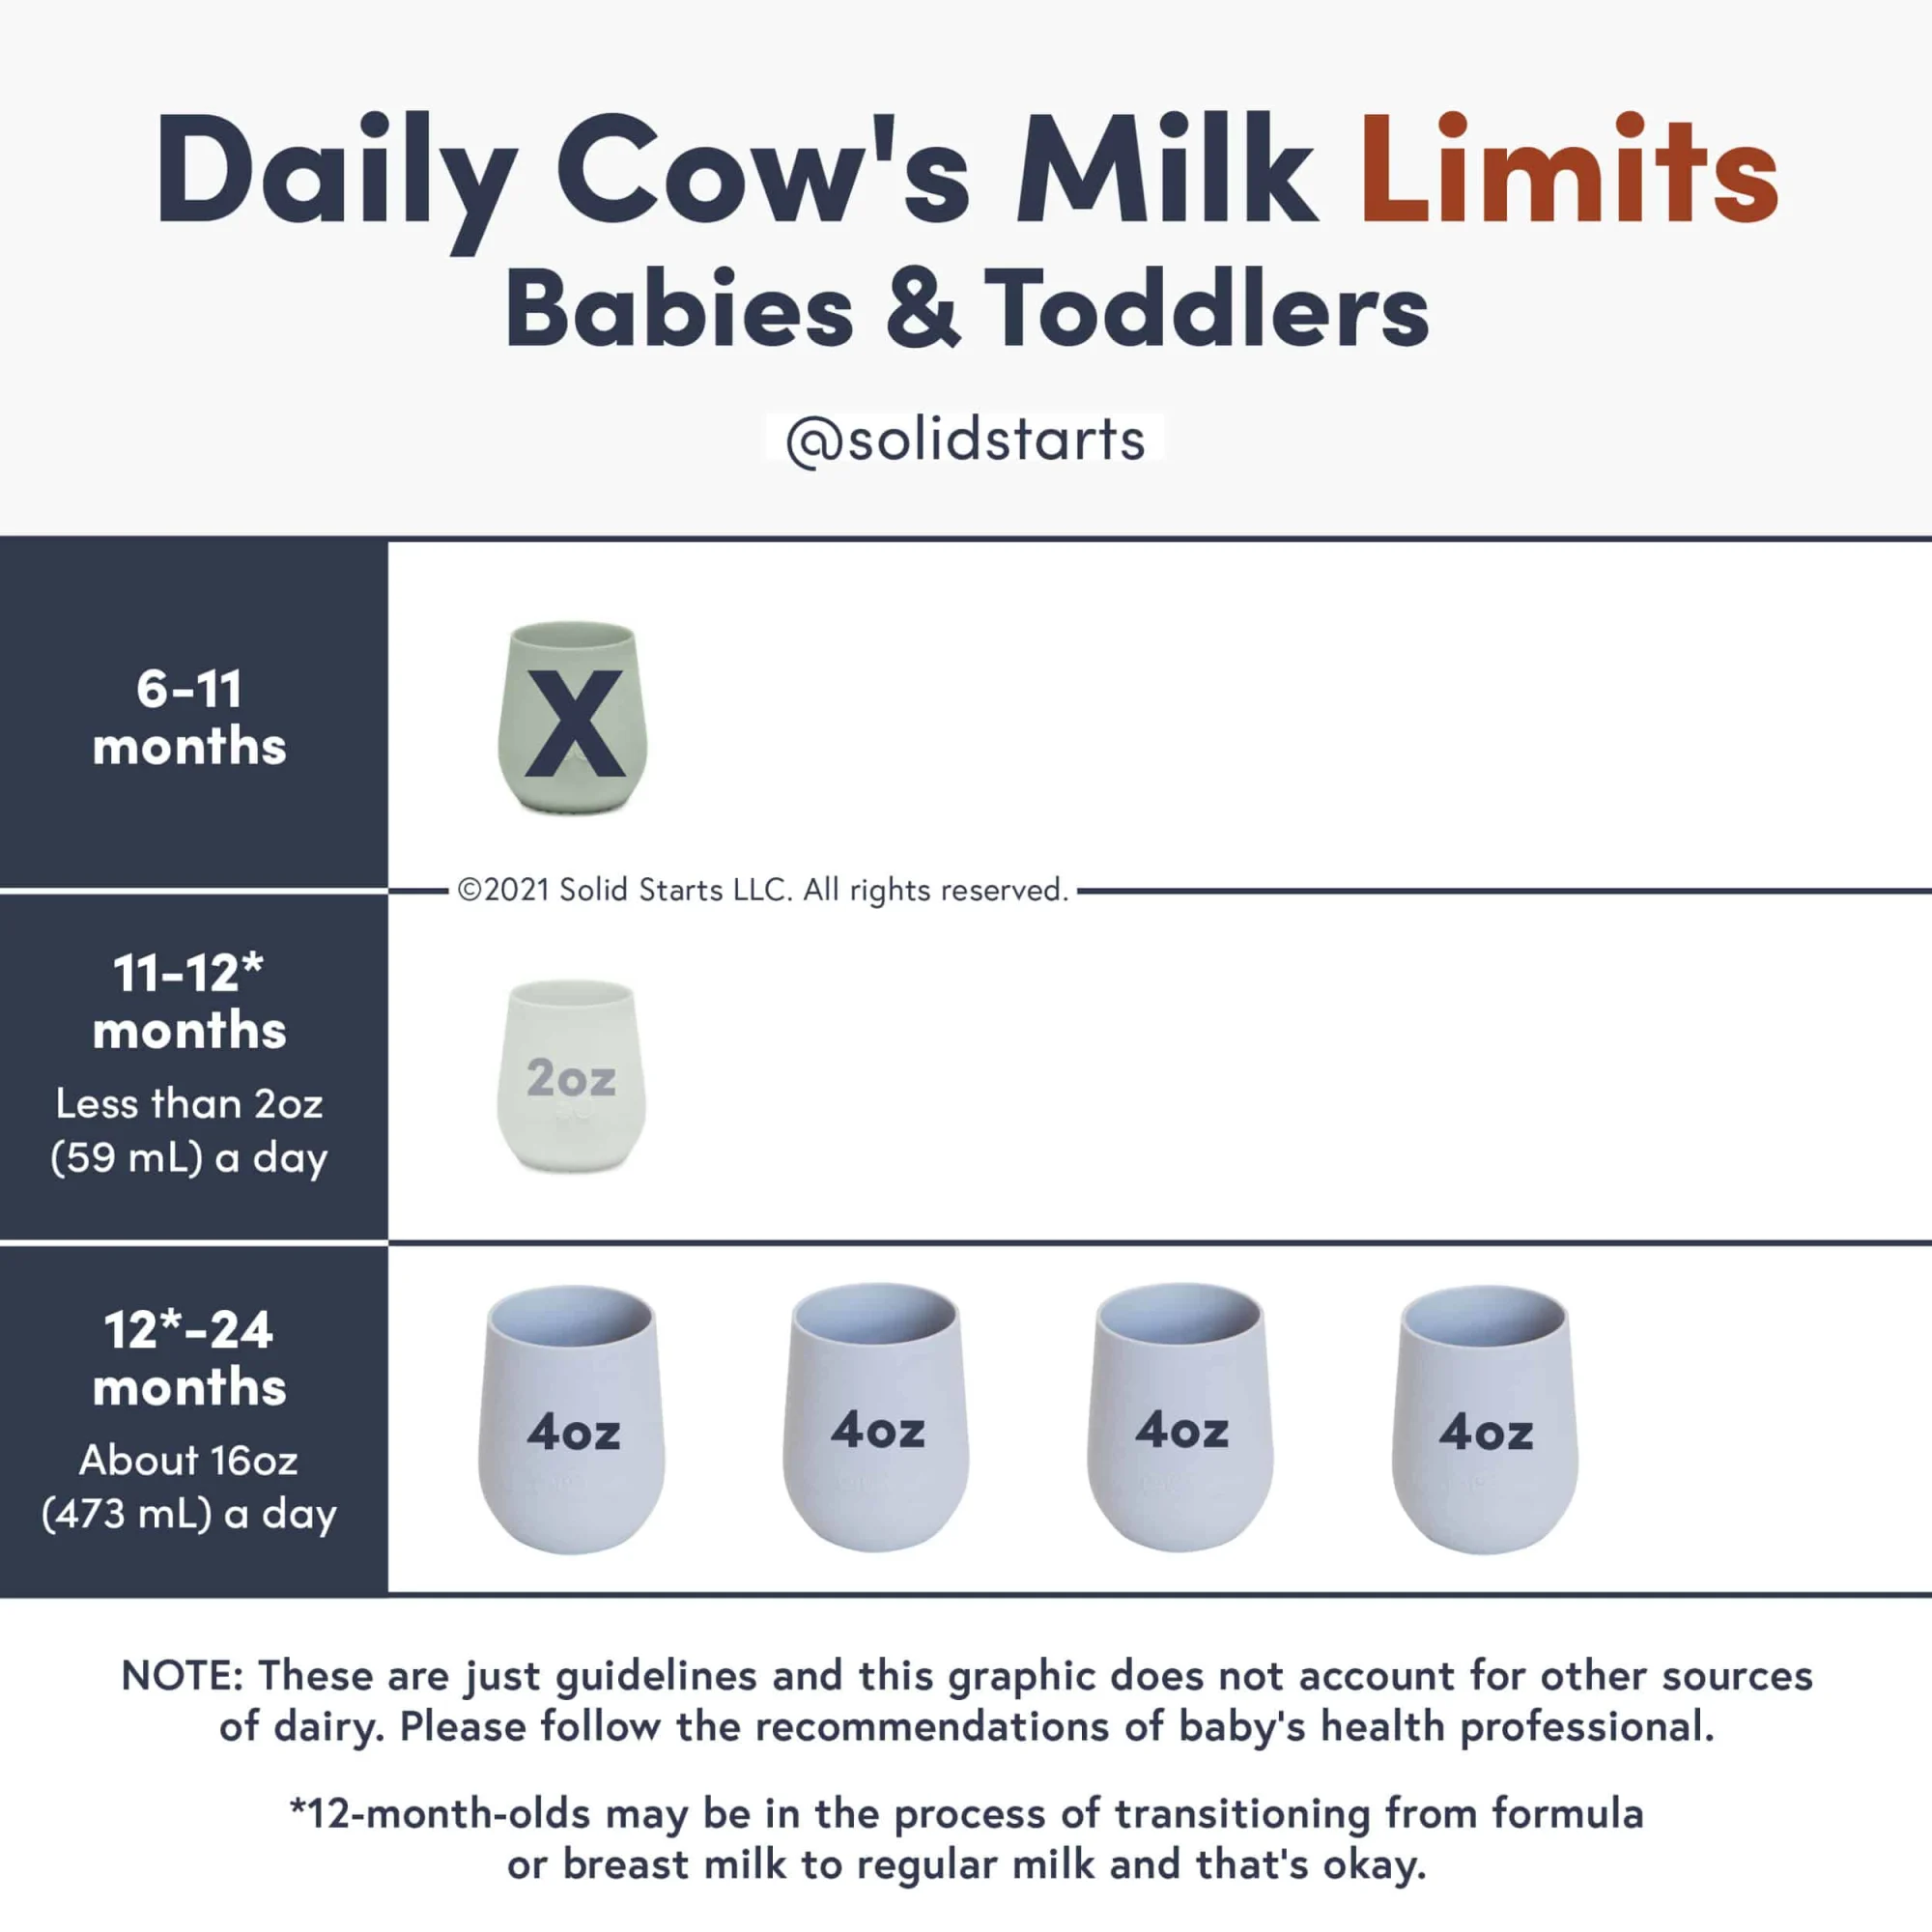 an infographic showing daily cow milk limits for babies and toddlers with no cow milk allowed before 11 months of age, small sips in an open cup around 11-12 mos of age, and a suggested max of 16oz per day for 12-24 months